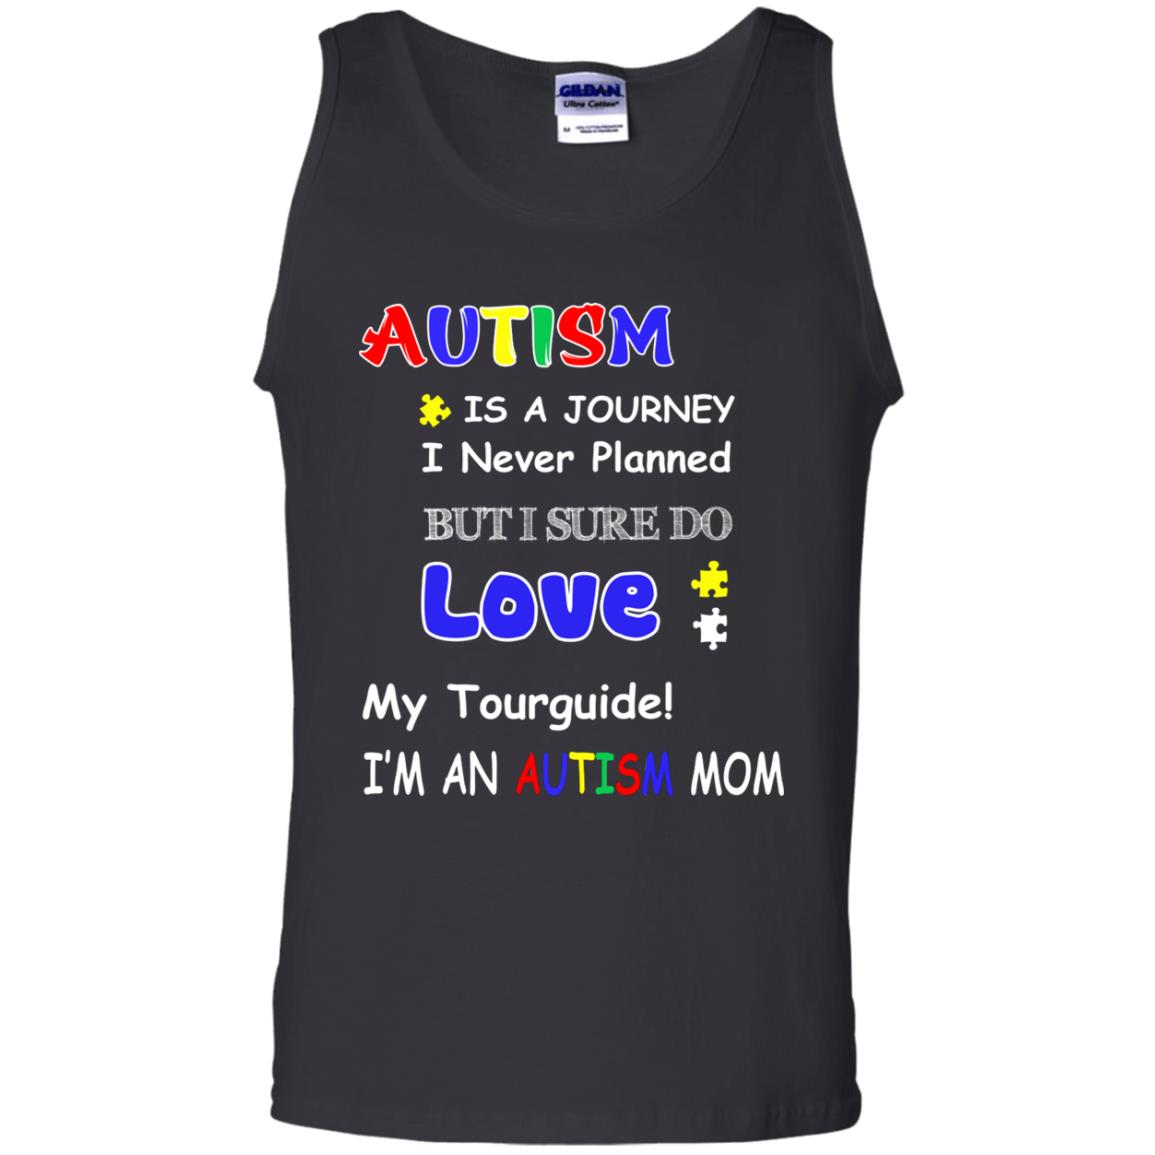 Autism Is A Journey I Never Planned But I Sure Do Love My Tourguide Im An Autism Mom ShirtG220 Gildan 100% Cotton Tank Top